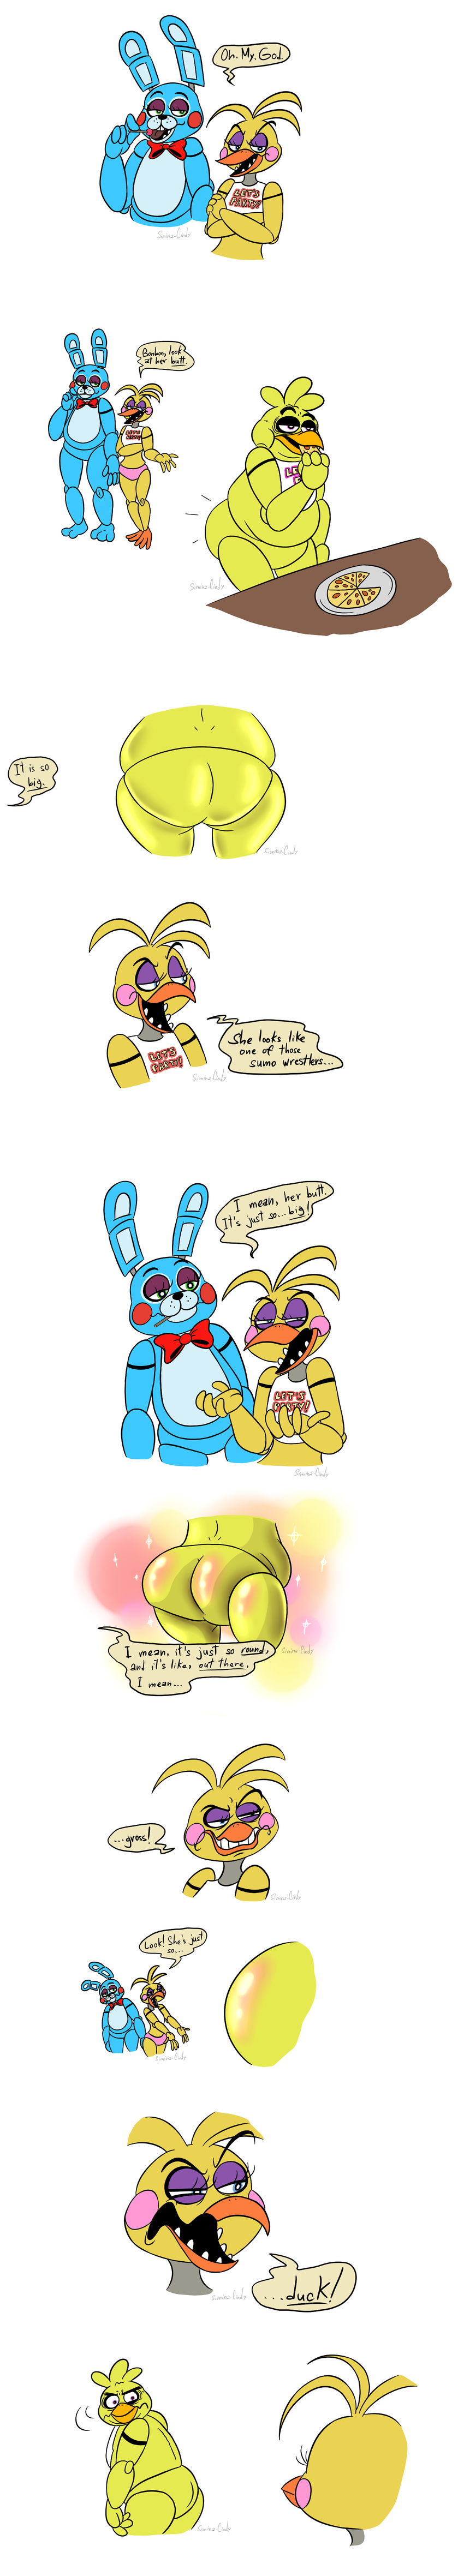 angry animatronic anthro bow_tie butt chica_(fnaf) female five_nights_at_freddy's five_nights_at_freddy's_2 food group jealous machine male mechanical pizza robot simina-cindy toy_bonnie_(fnaf) toy_chica_(fnaf)